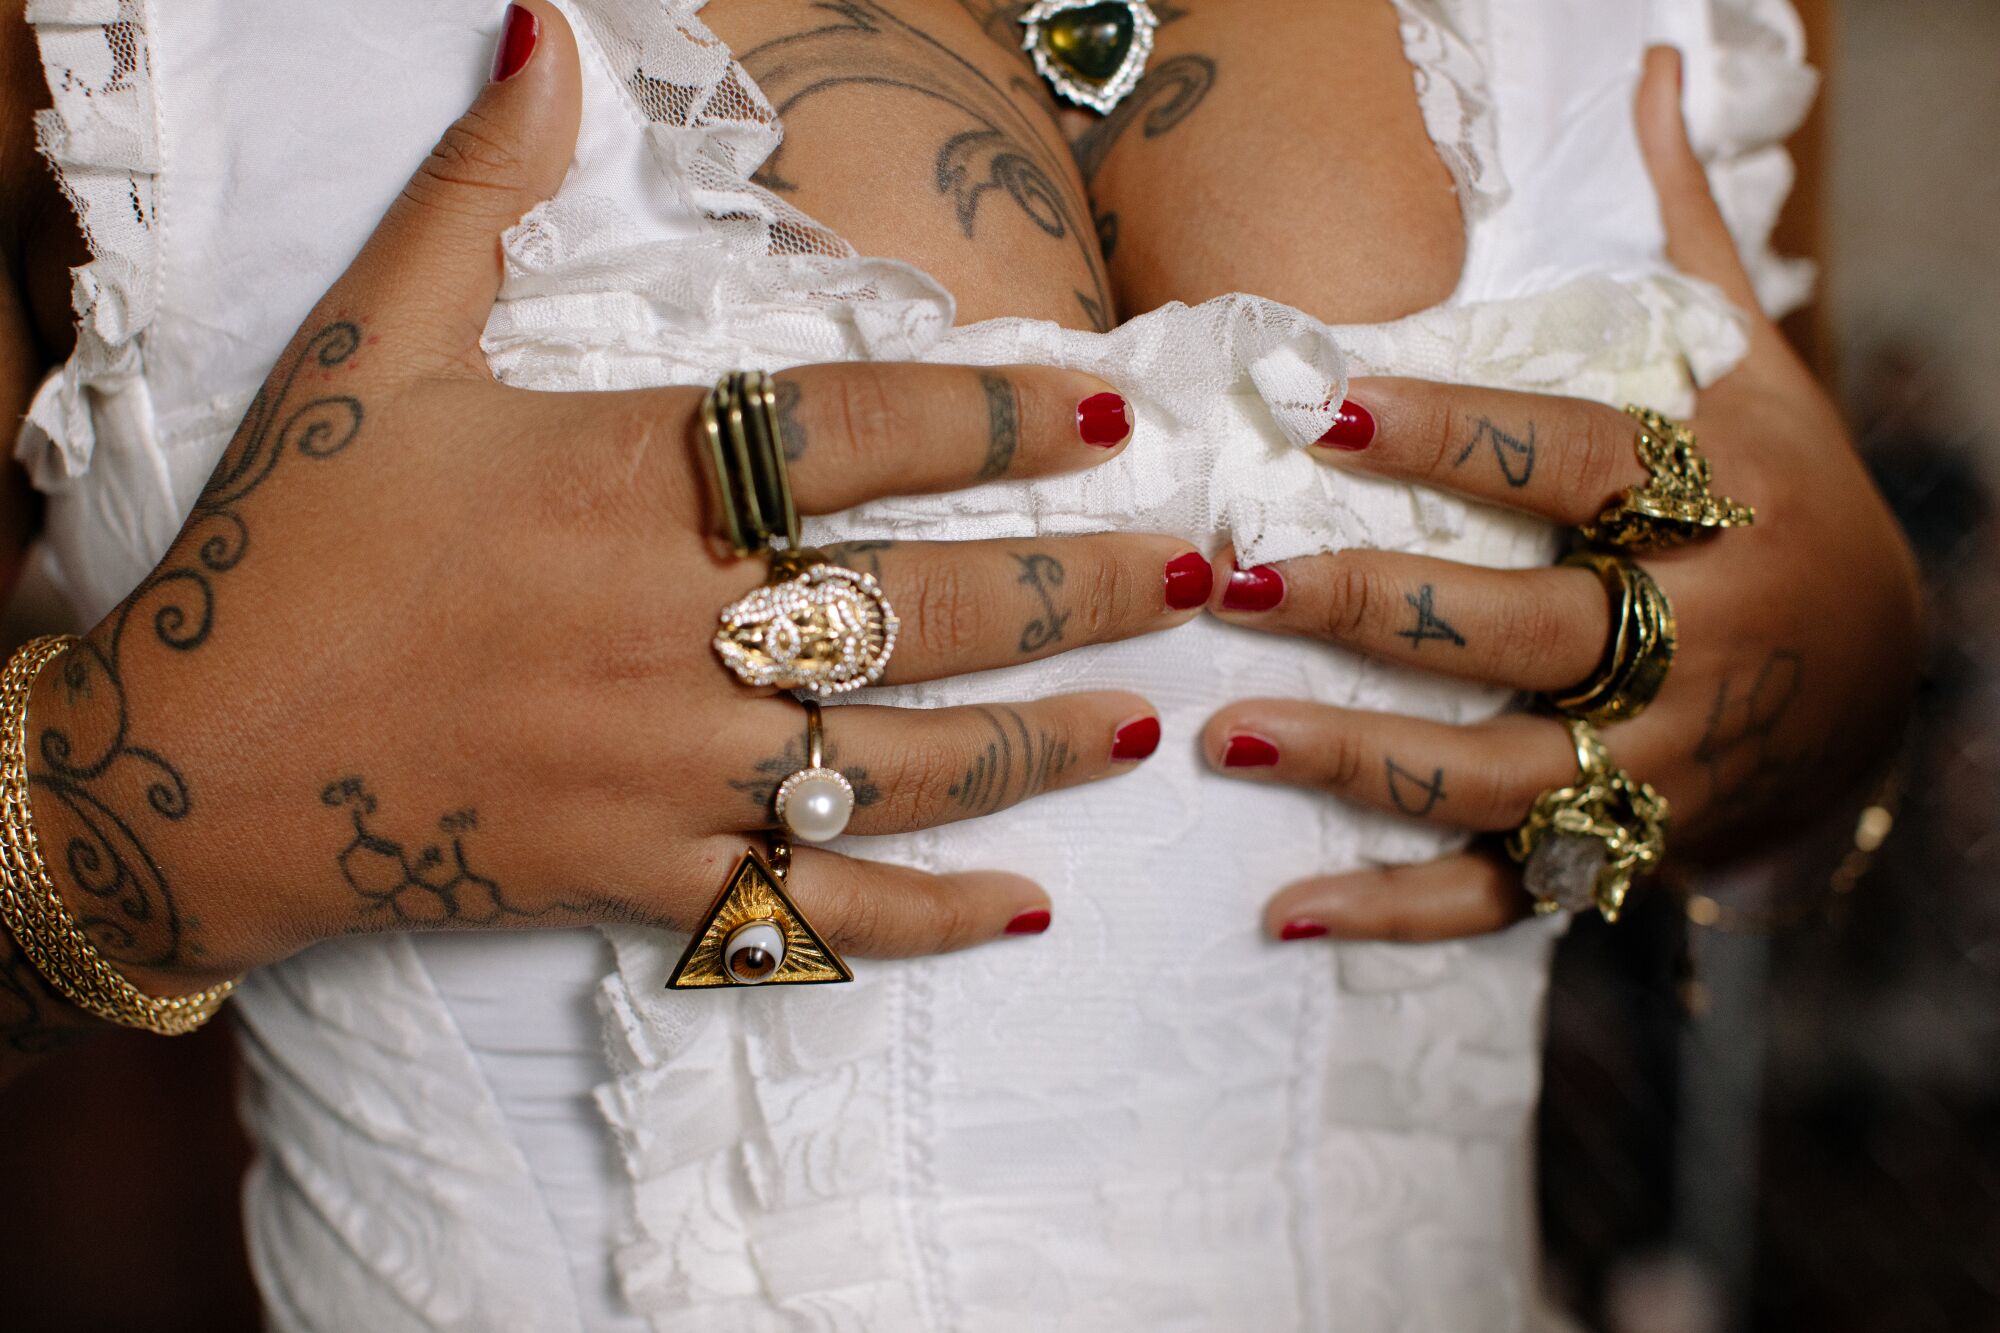 Close-up of a woman's bust. The woman is wearing a white dress and has tattoos on her hands and fingers.